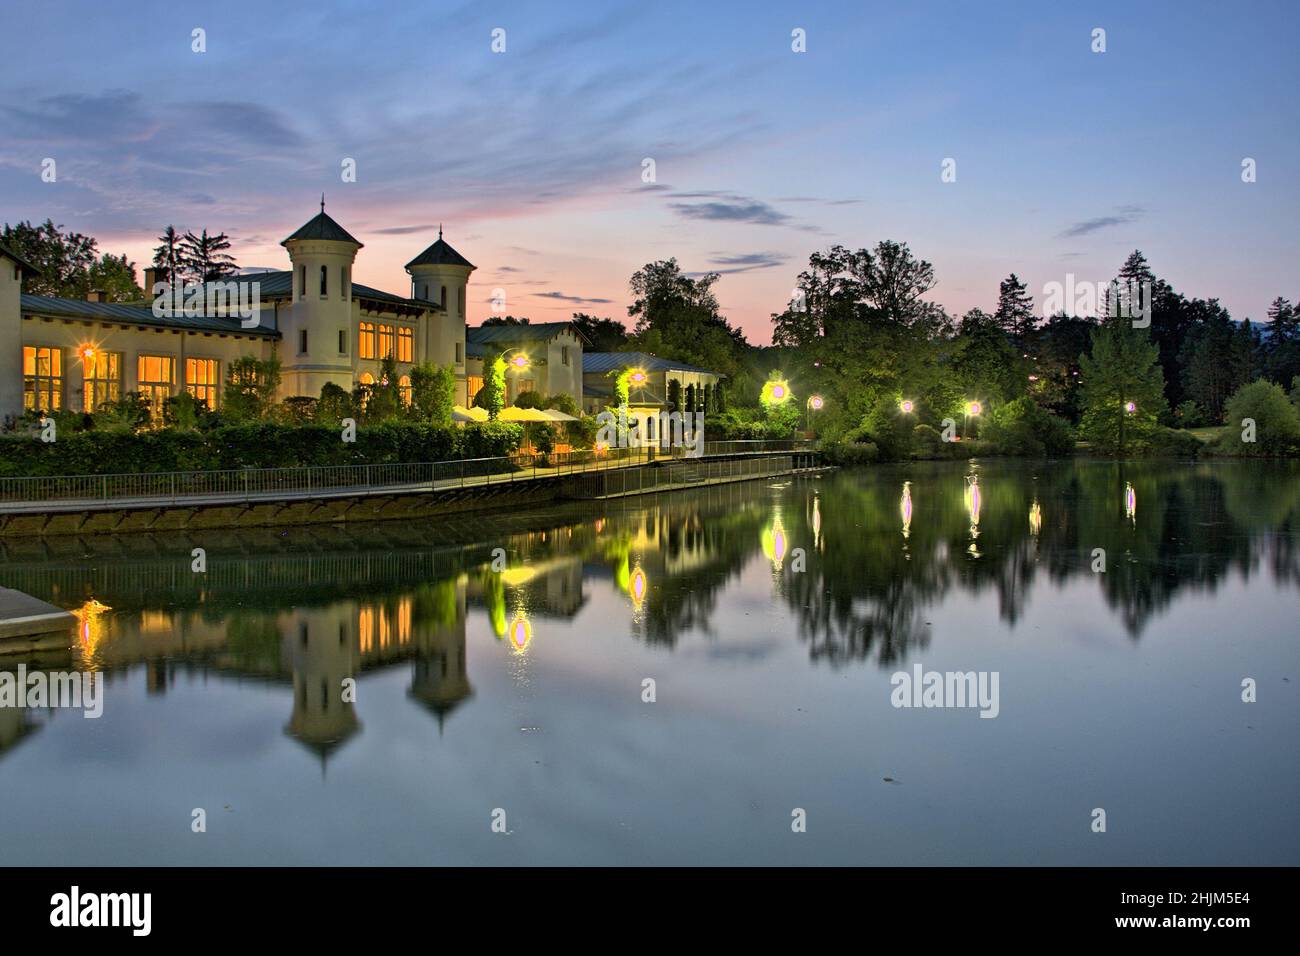 Evening view of the Hilmteich castle with the iconic lake in Graz, Austria Stock Photo